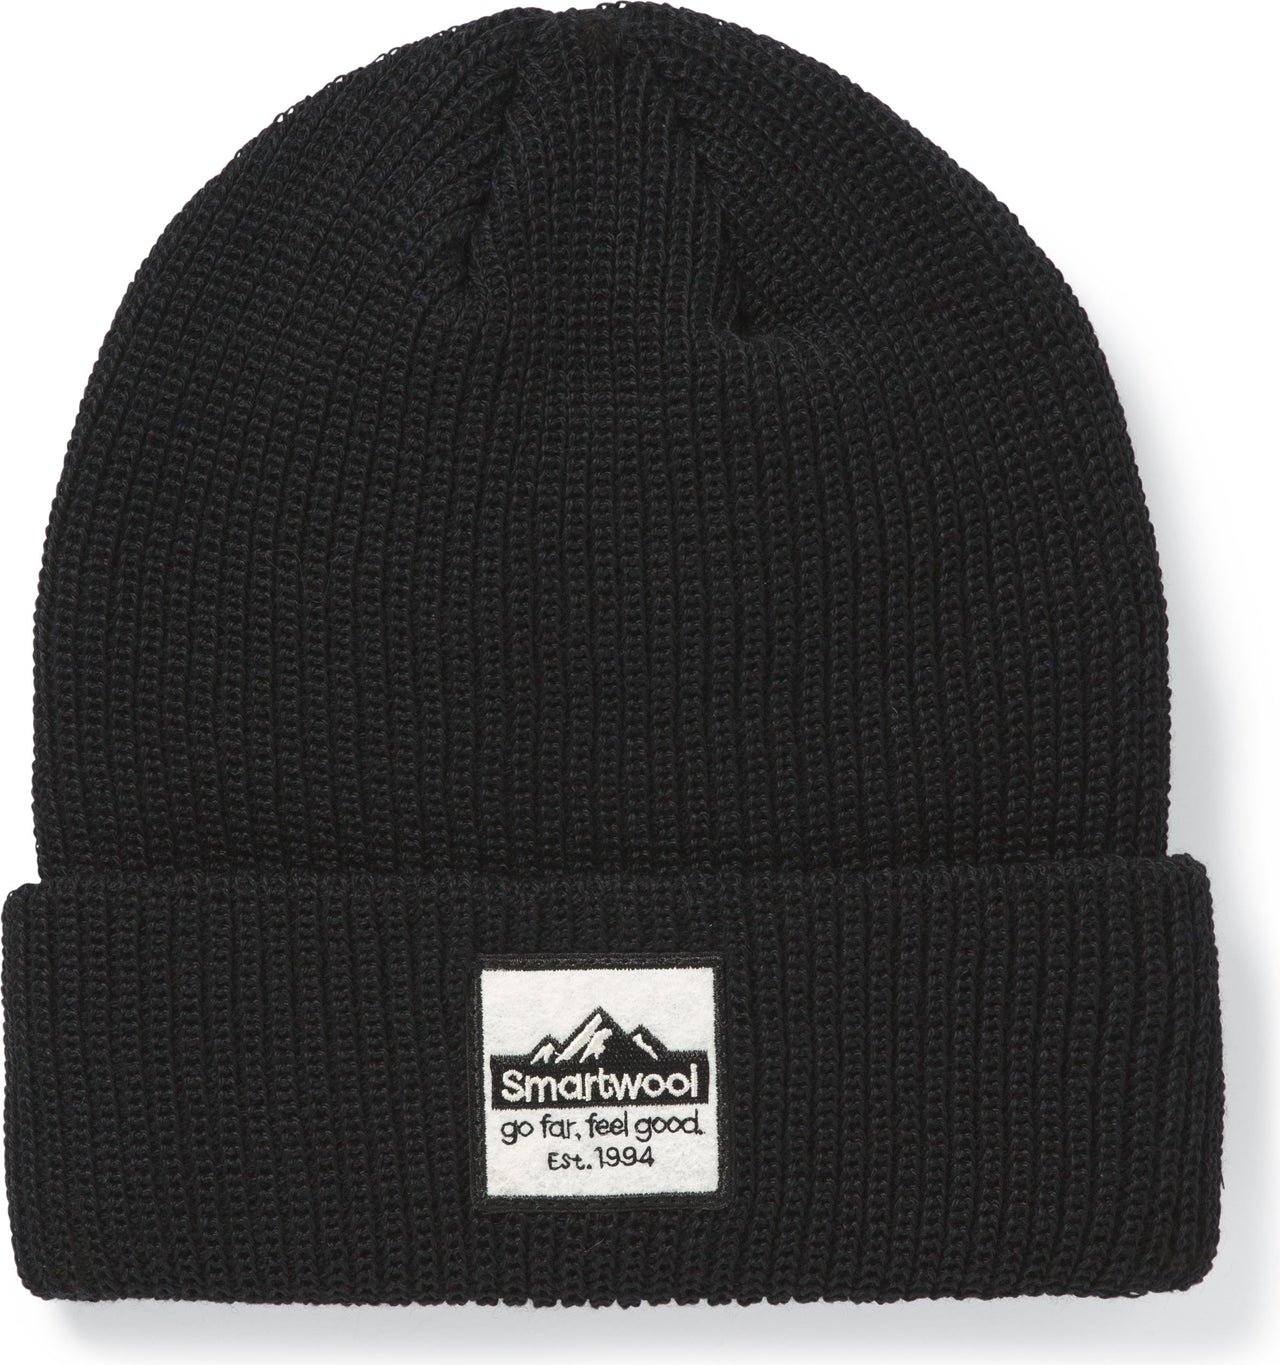 Smartwool Accessories Smartwool Patch Beanie Black